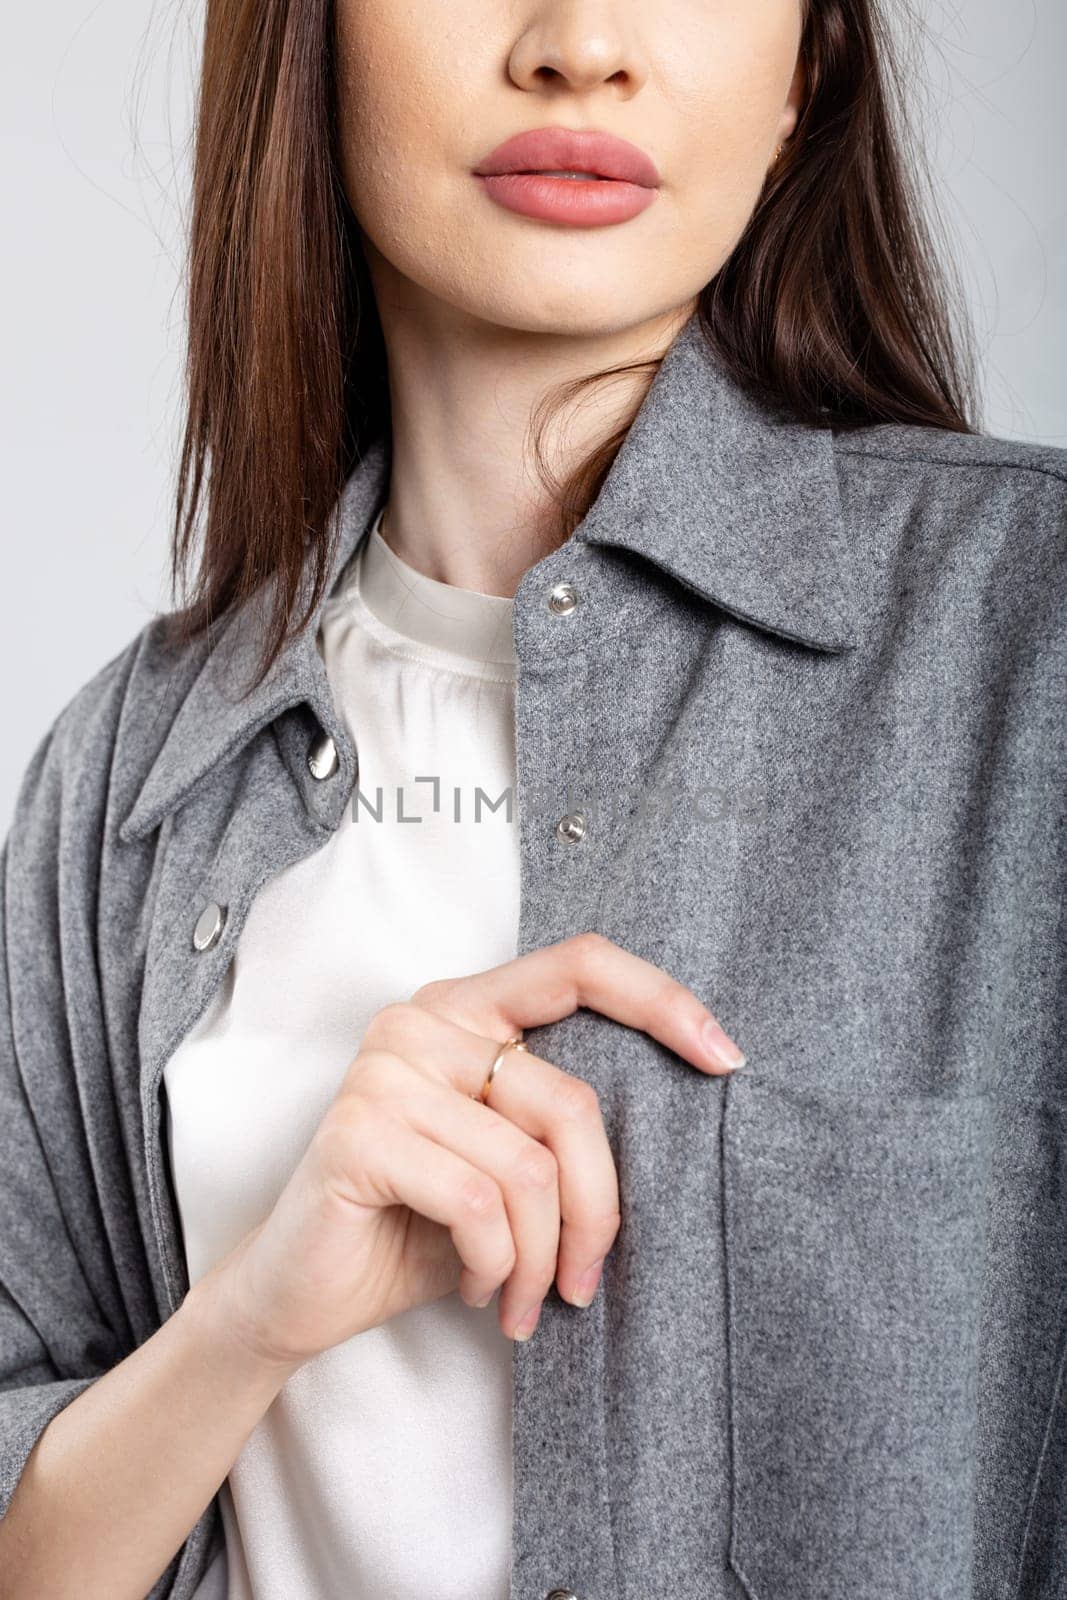 Elegant young woman in a gray shirt with hand in pocket by Pukhovskiy